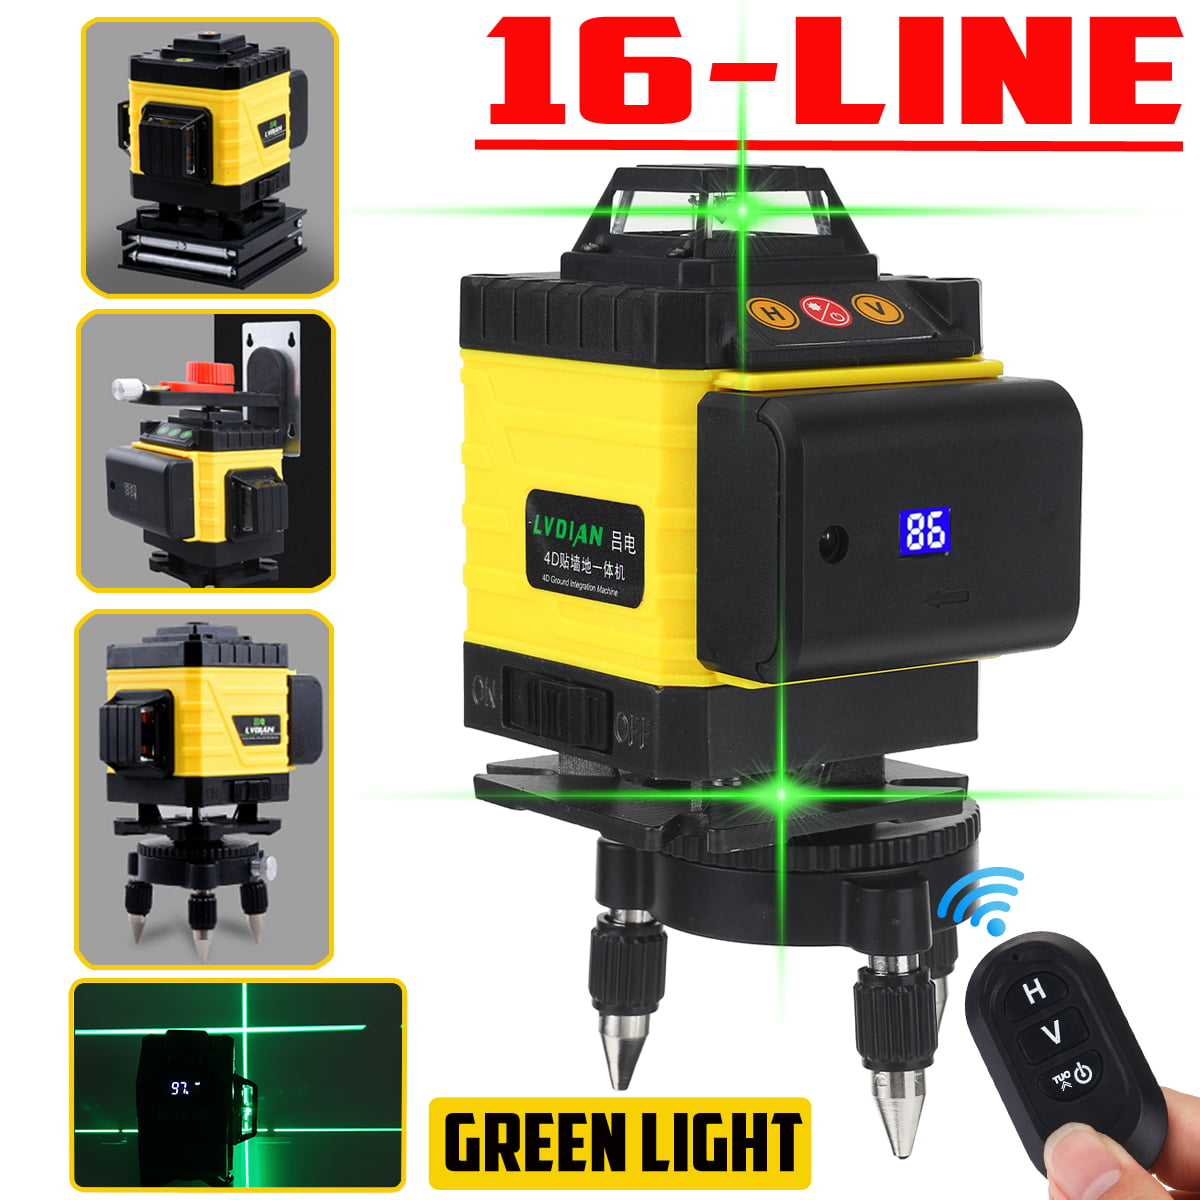 Details about    3D Laser Level 16/12 Line LED Display 360° Rotary Self Leveling Meas